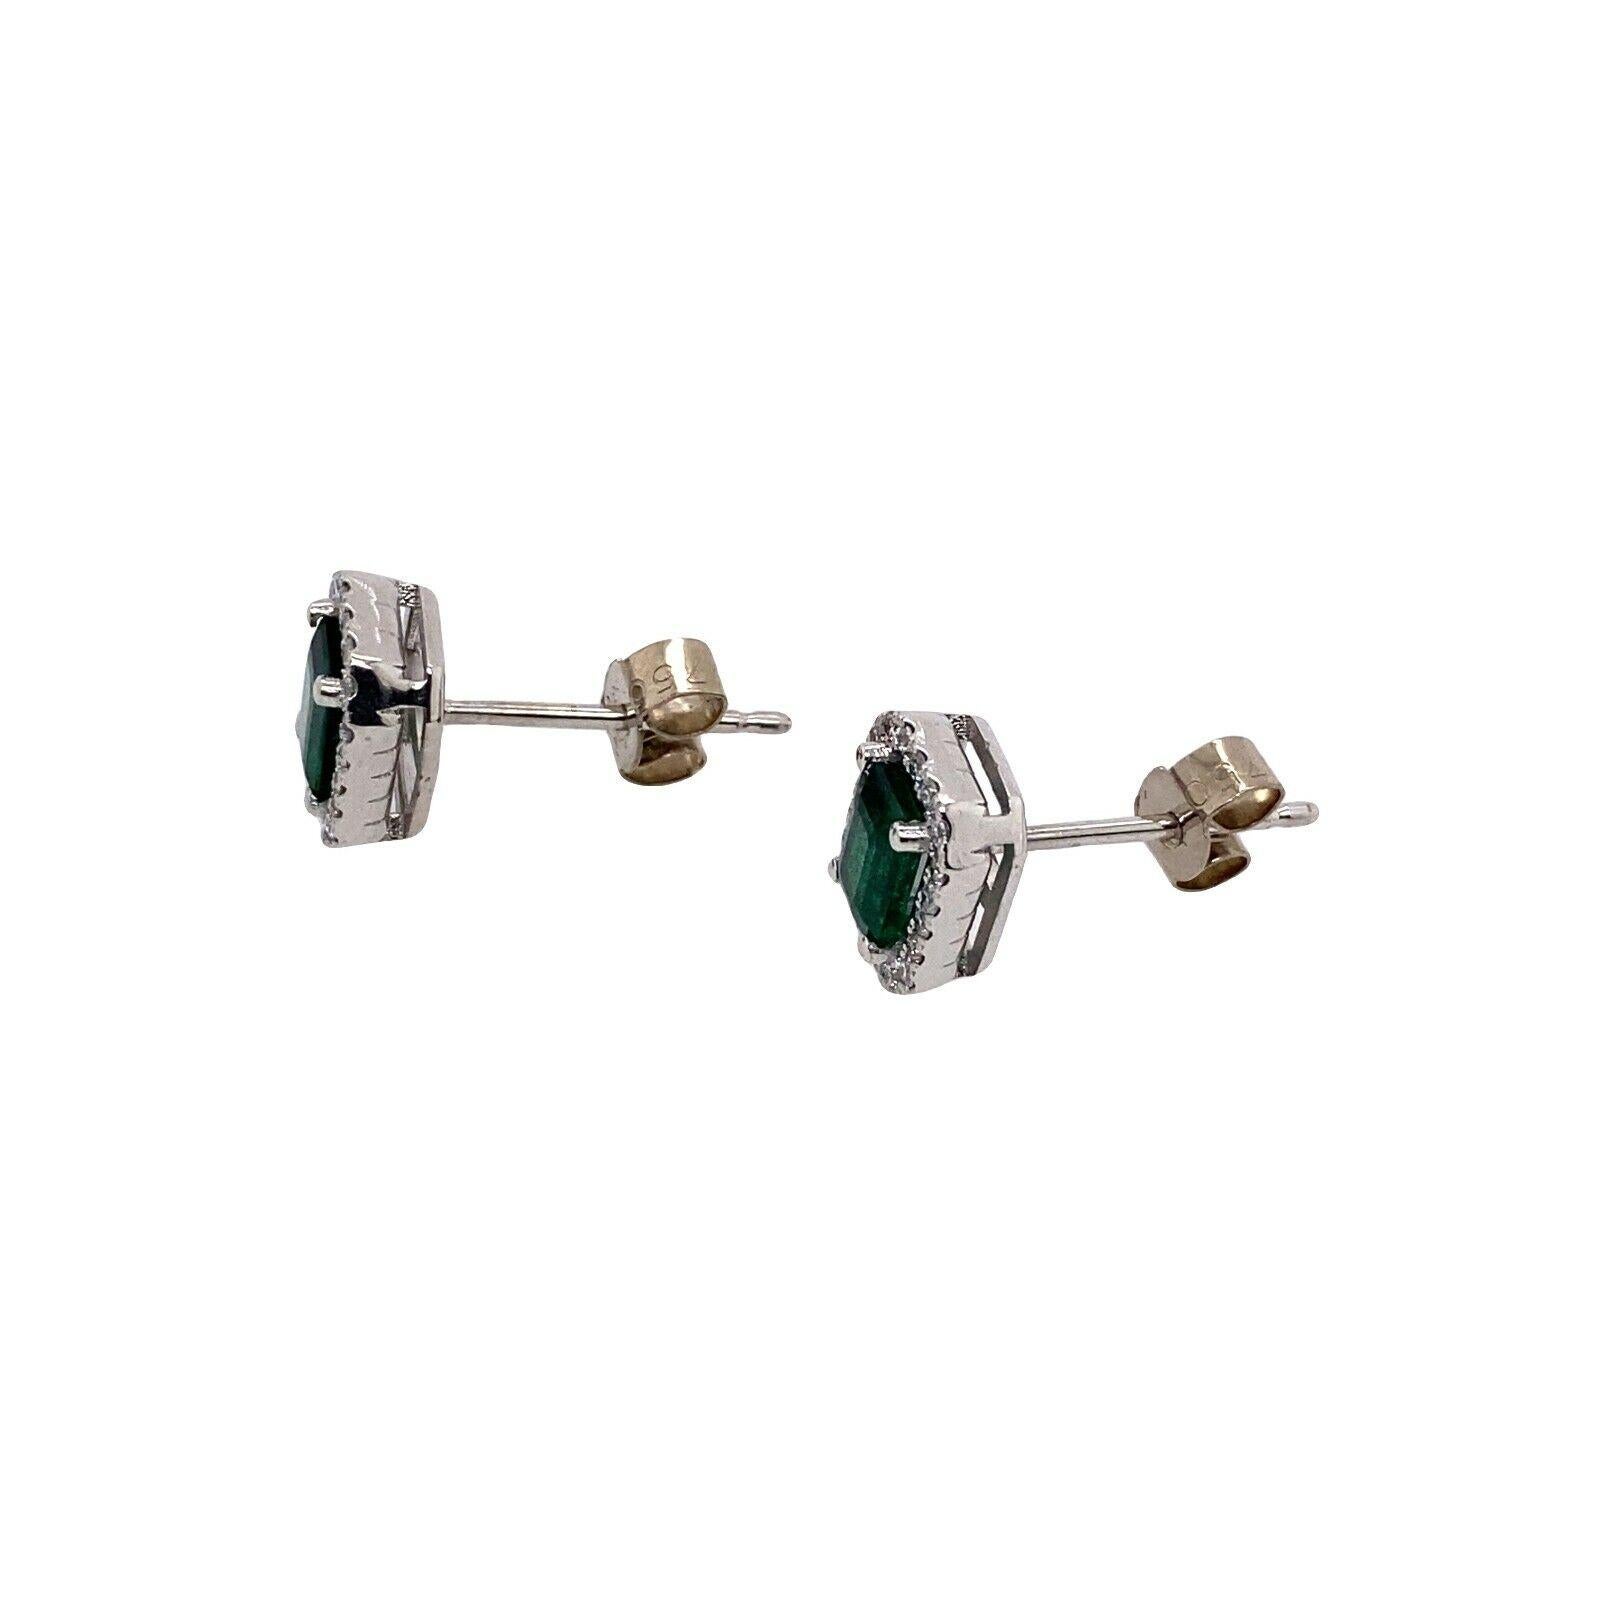 Emerald Cut Zambian Emeralds Surrounded by Diamonds Set in 18ct White Gold For Sale 1